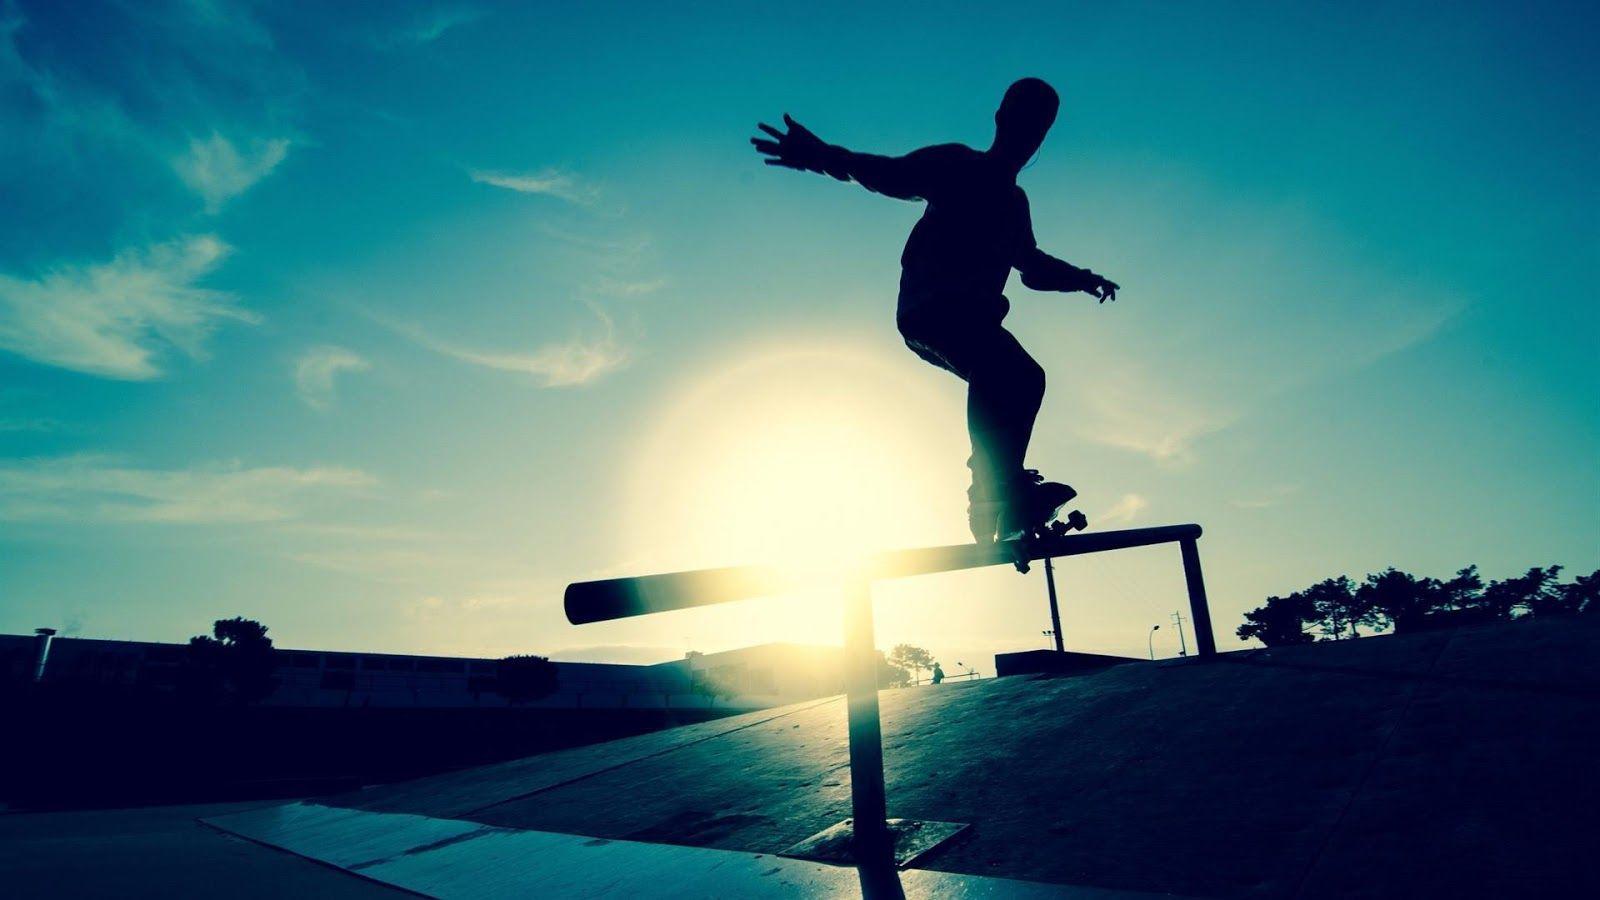 Skateboard wallpapers hd desktop backgrounds images and pictures